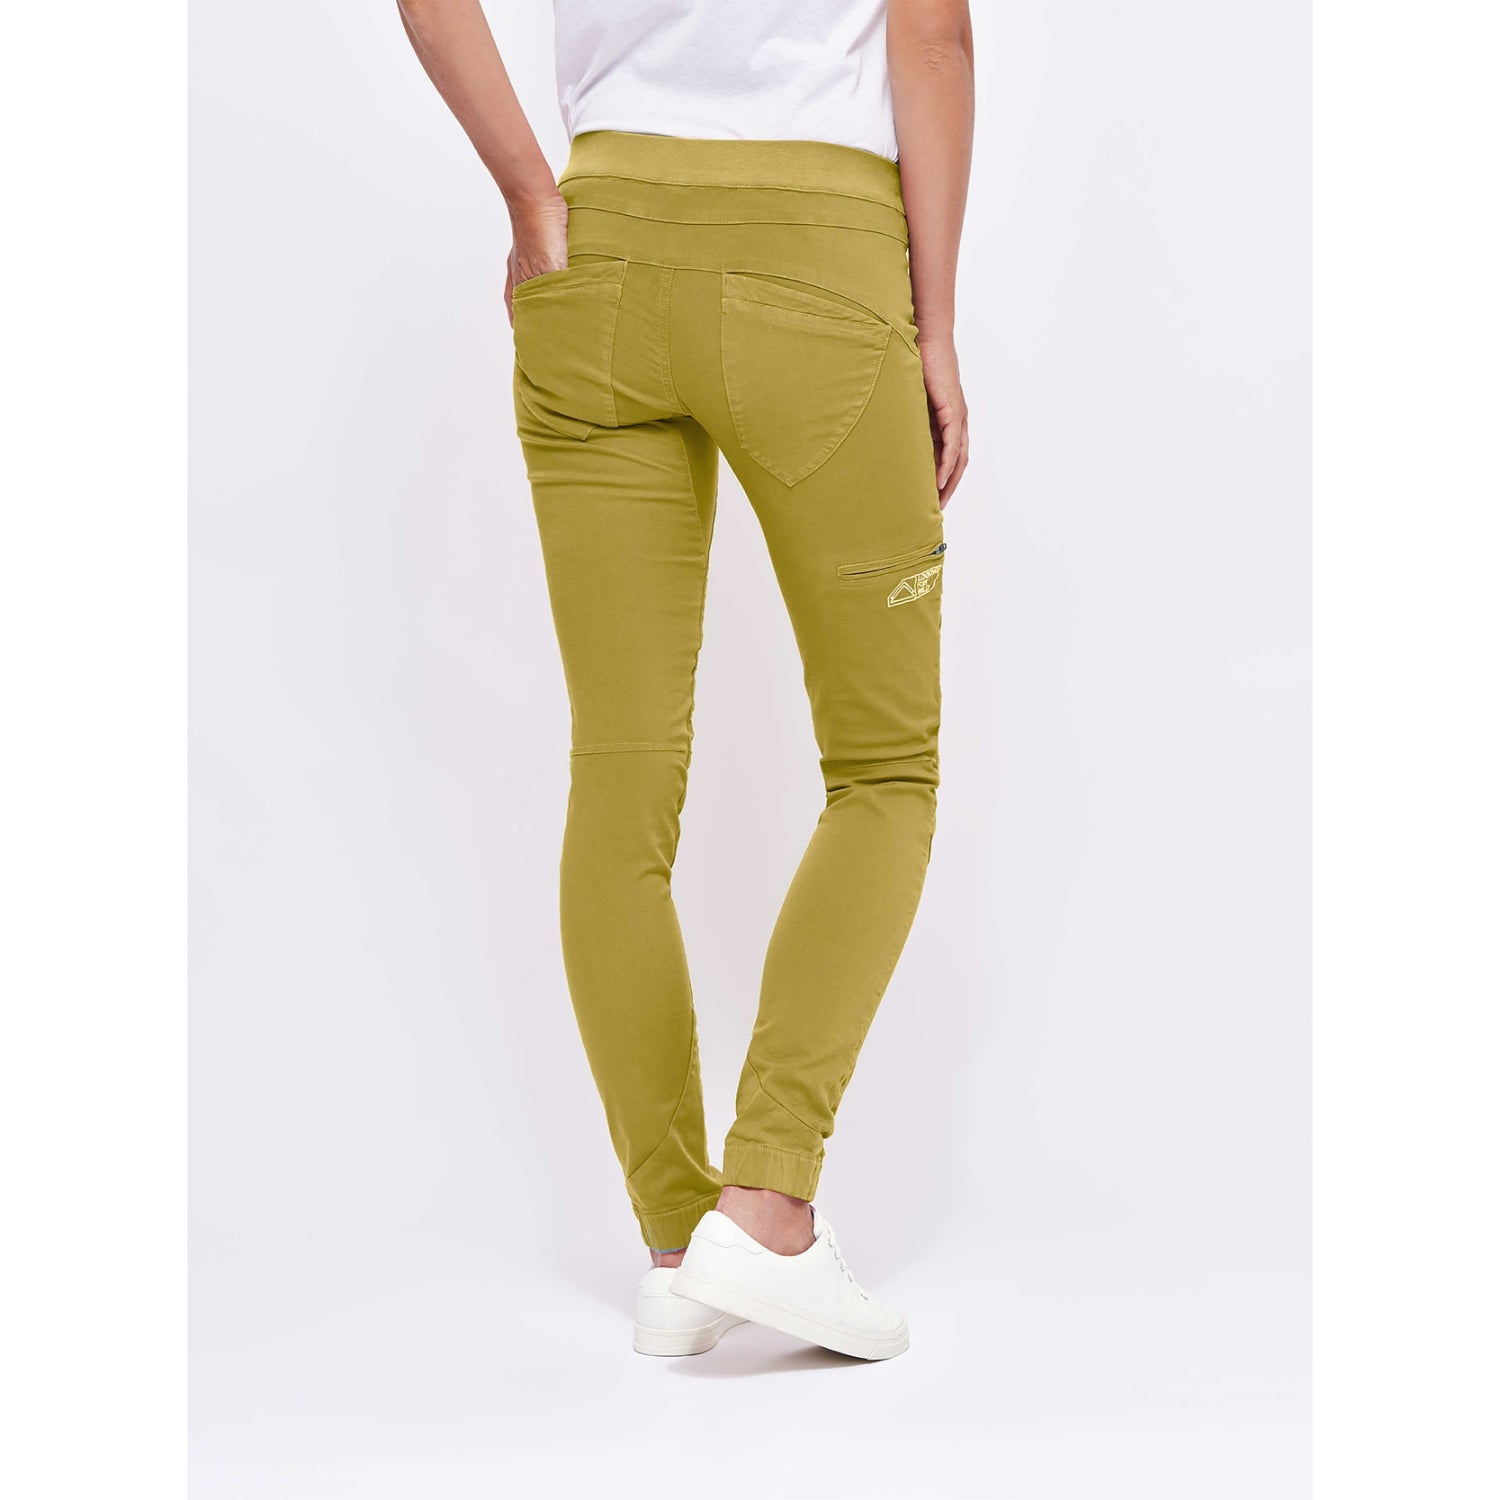 Looking For Wild Laila Peak Pant - Womens (Bamboo)